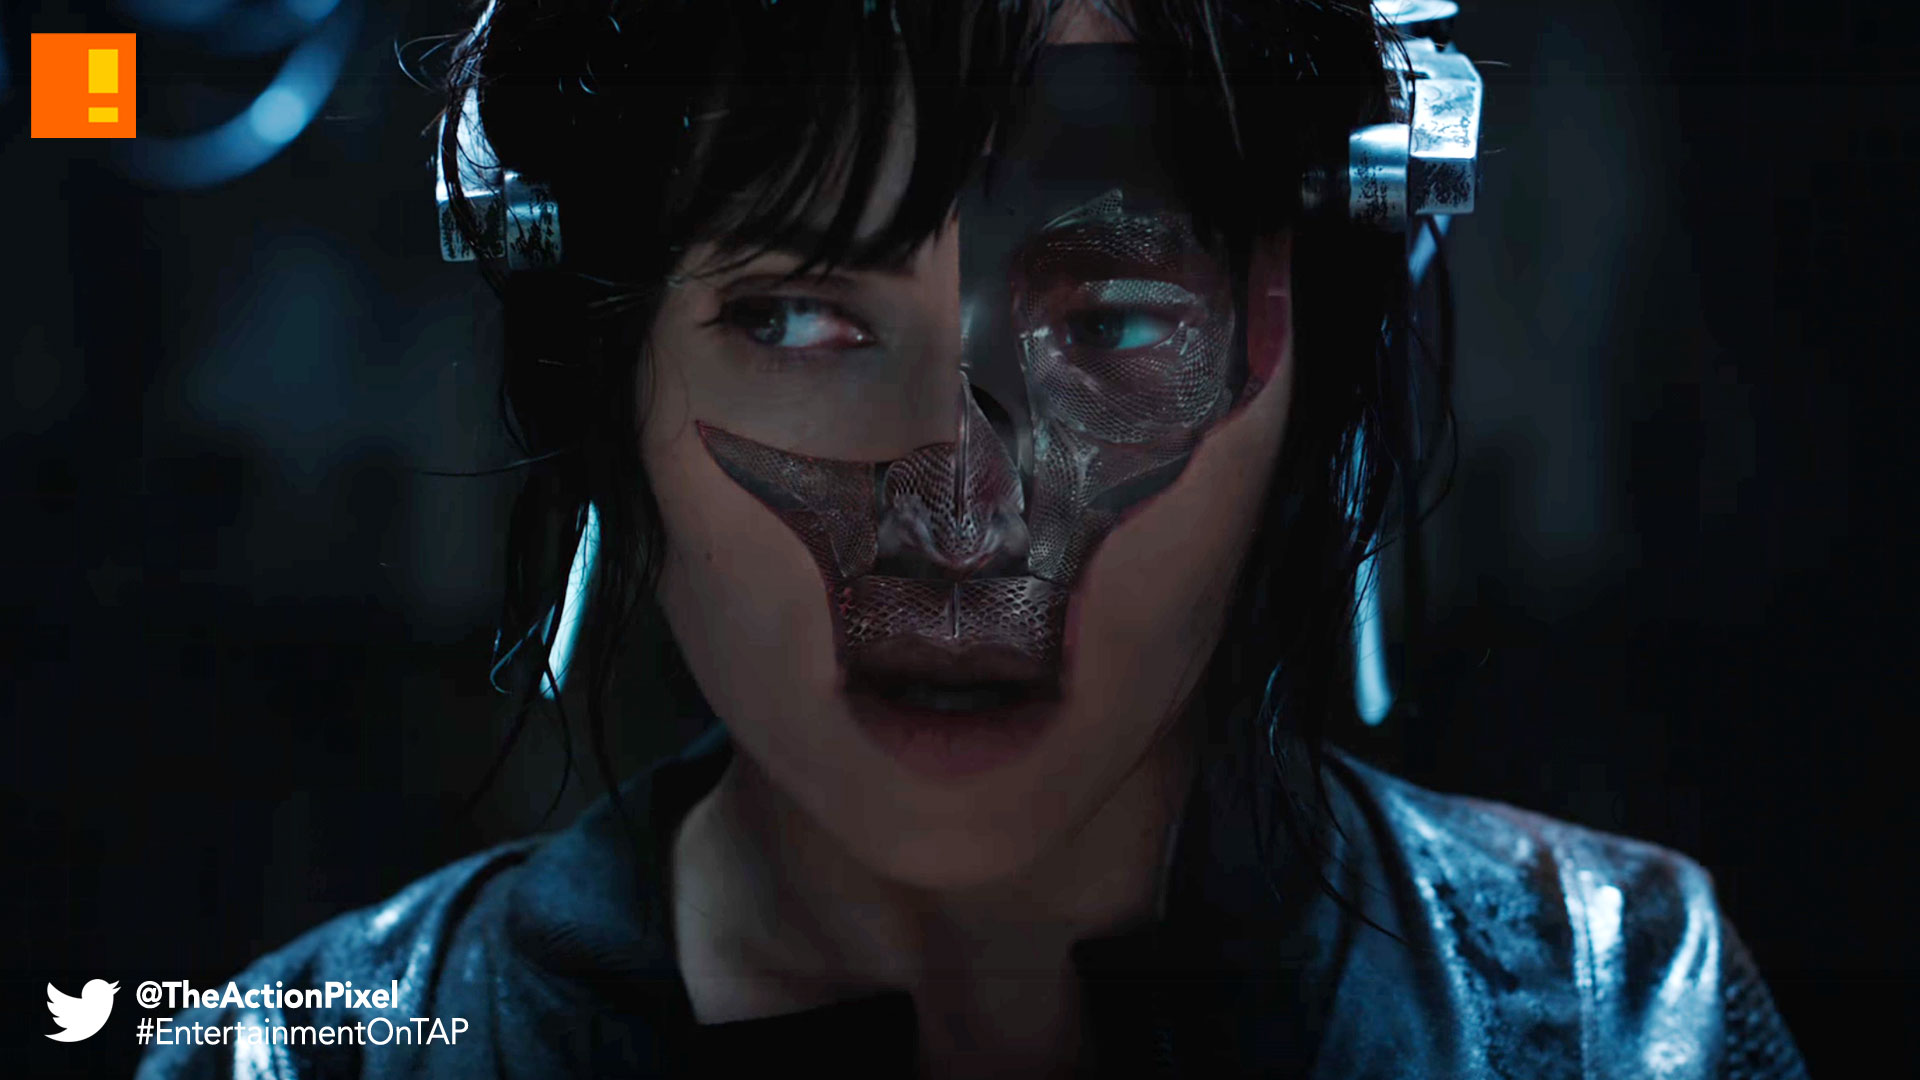 gits,trailer, major, trailer, ghost in the shell, paramount pictures, the action pixel, entertainment on tap